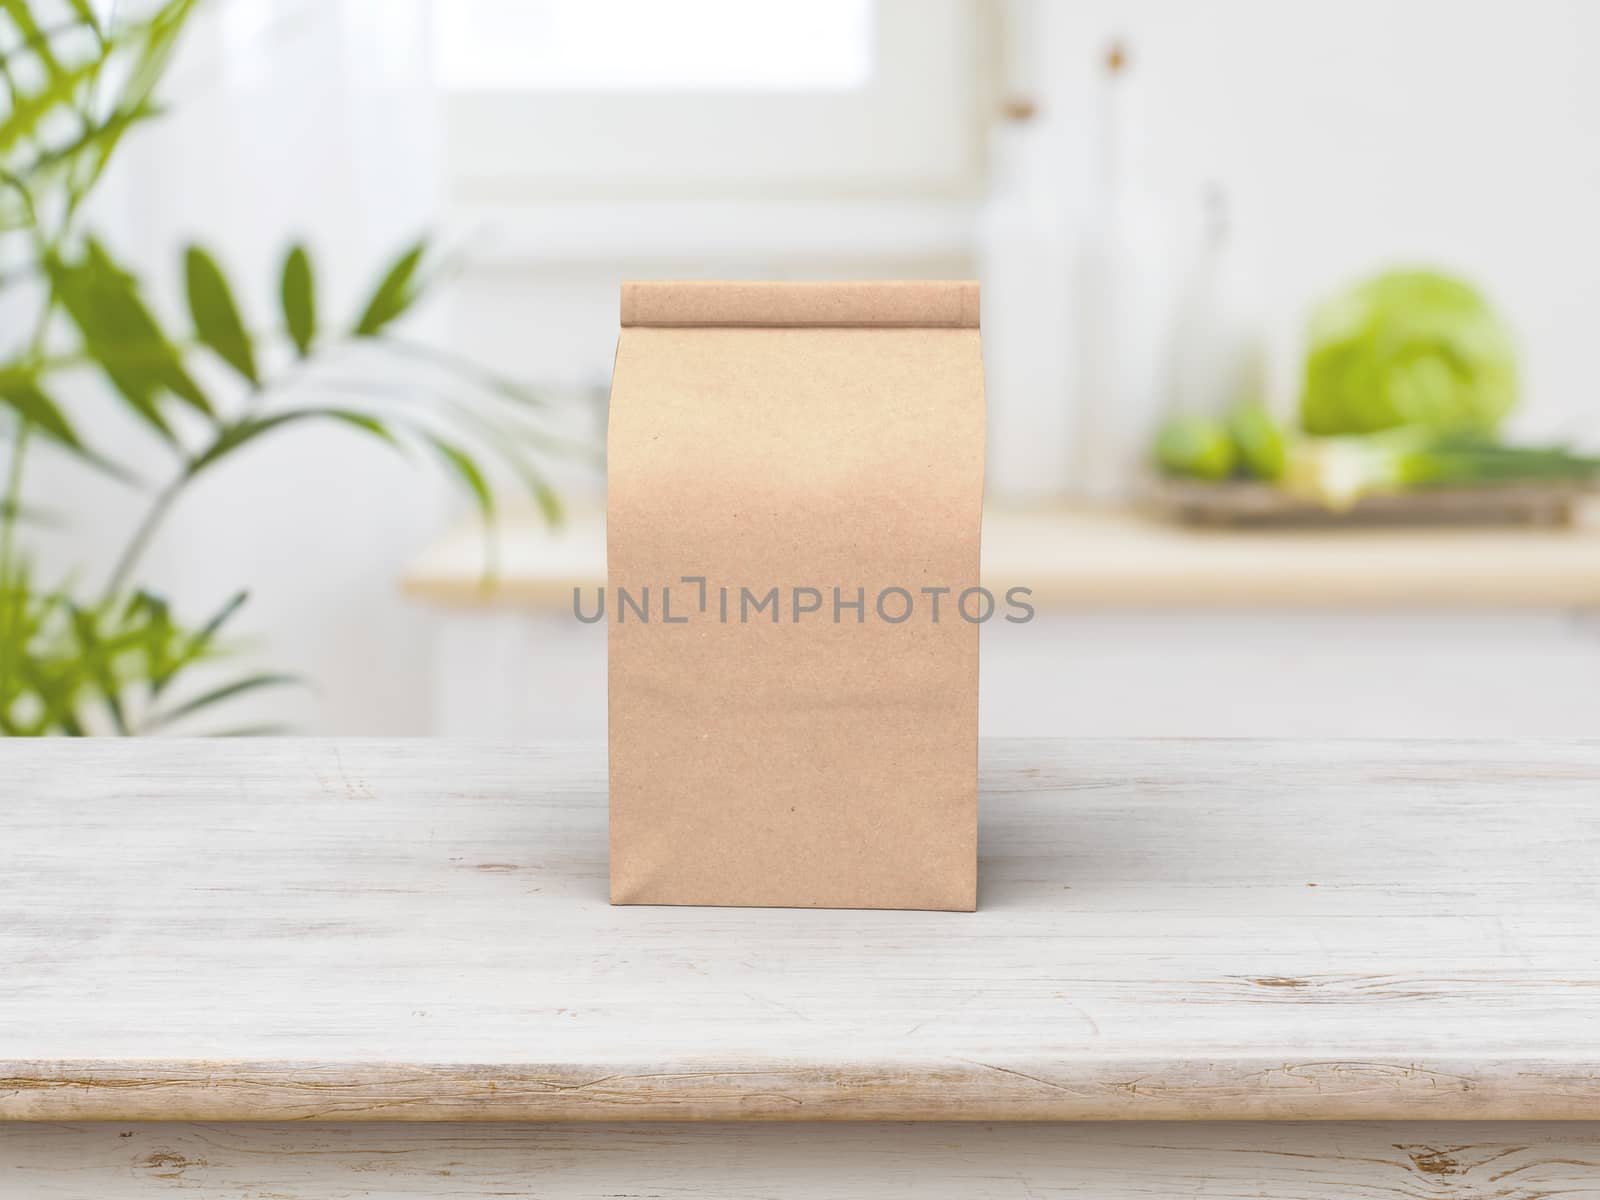 Coffee beam bag packaging mock-up design and wooden table in kic by cougarsan